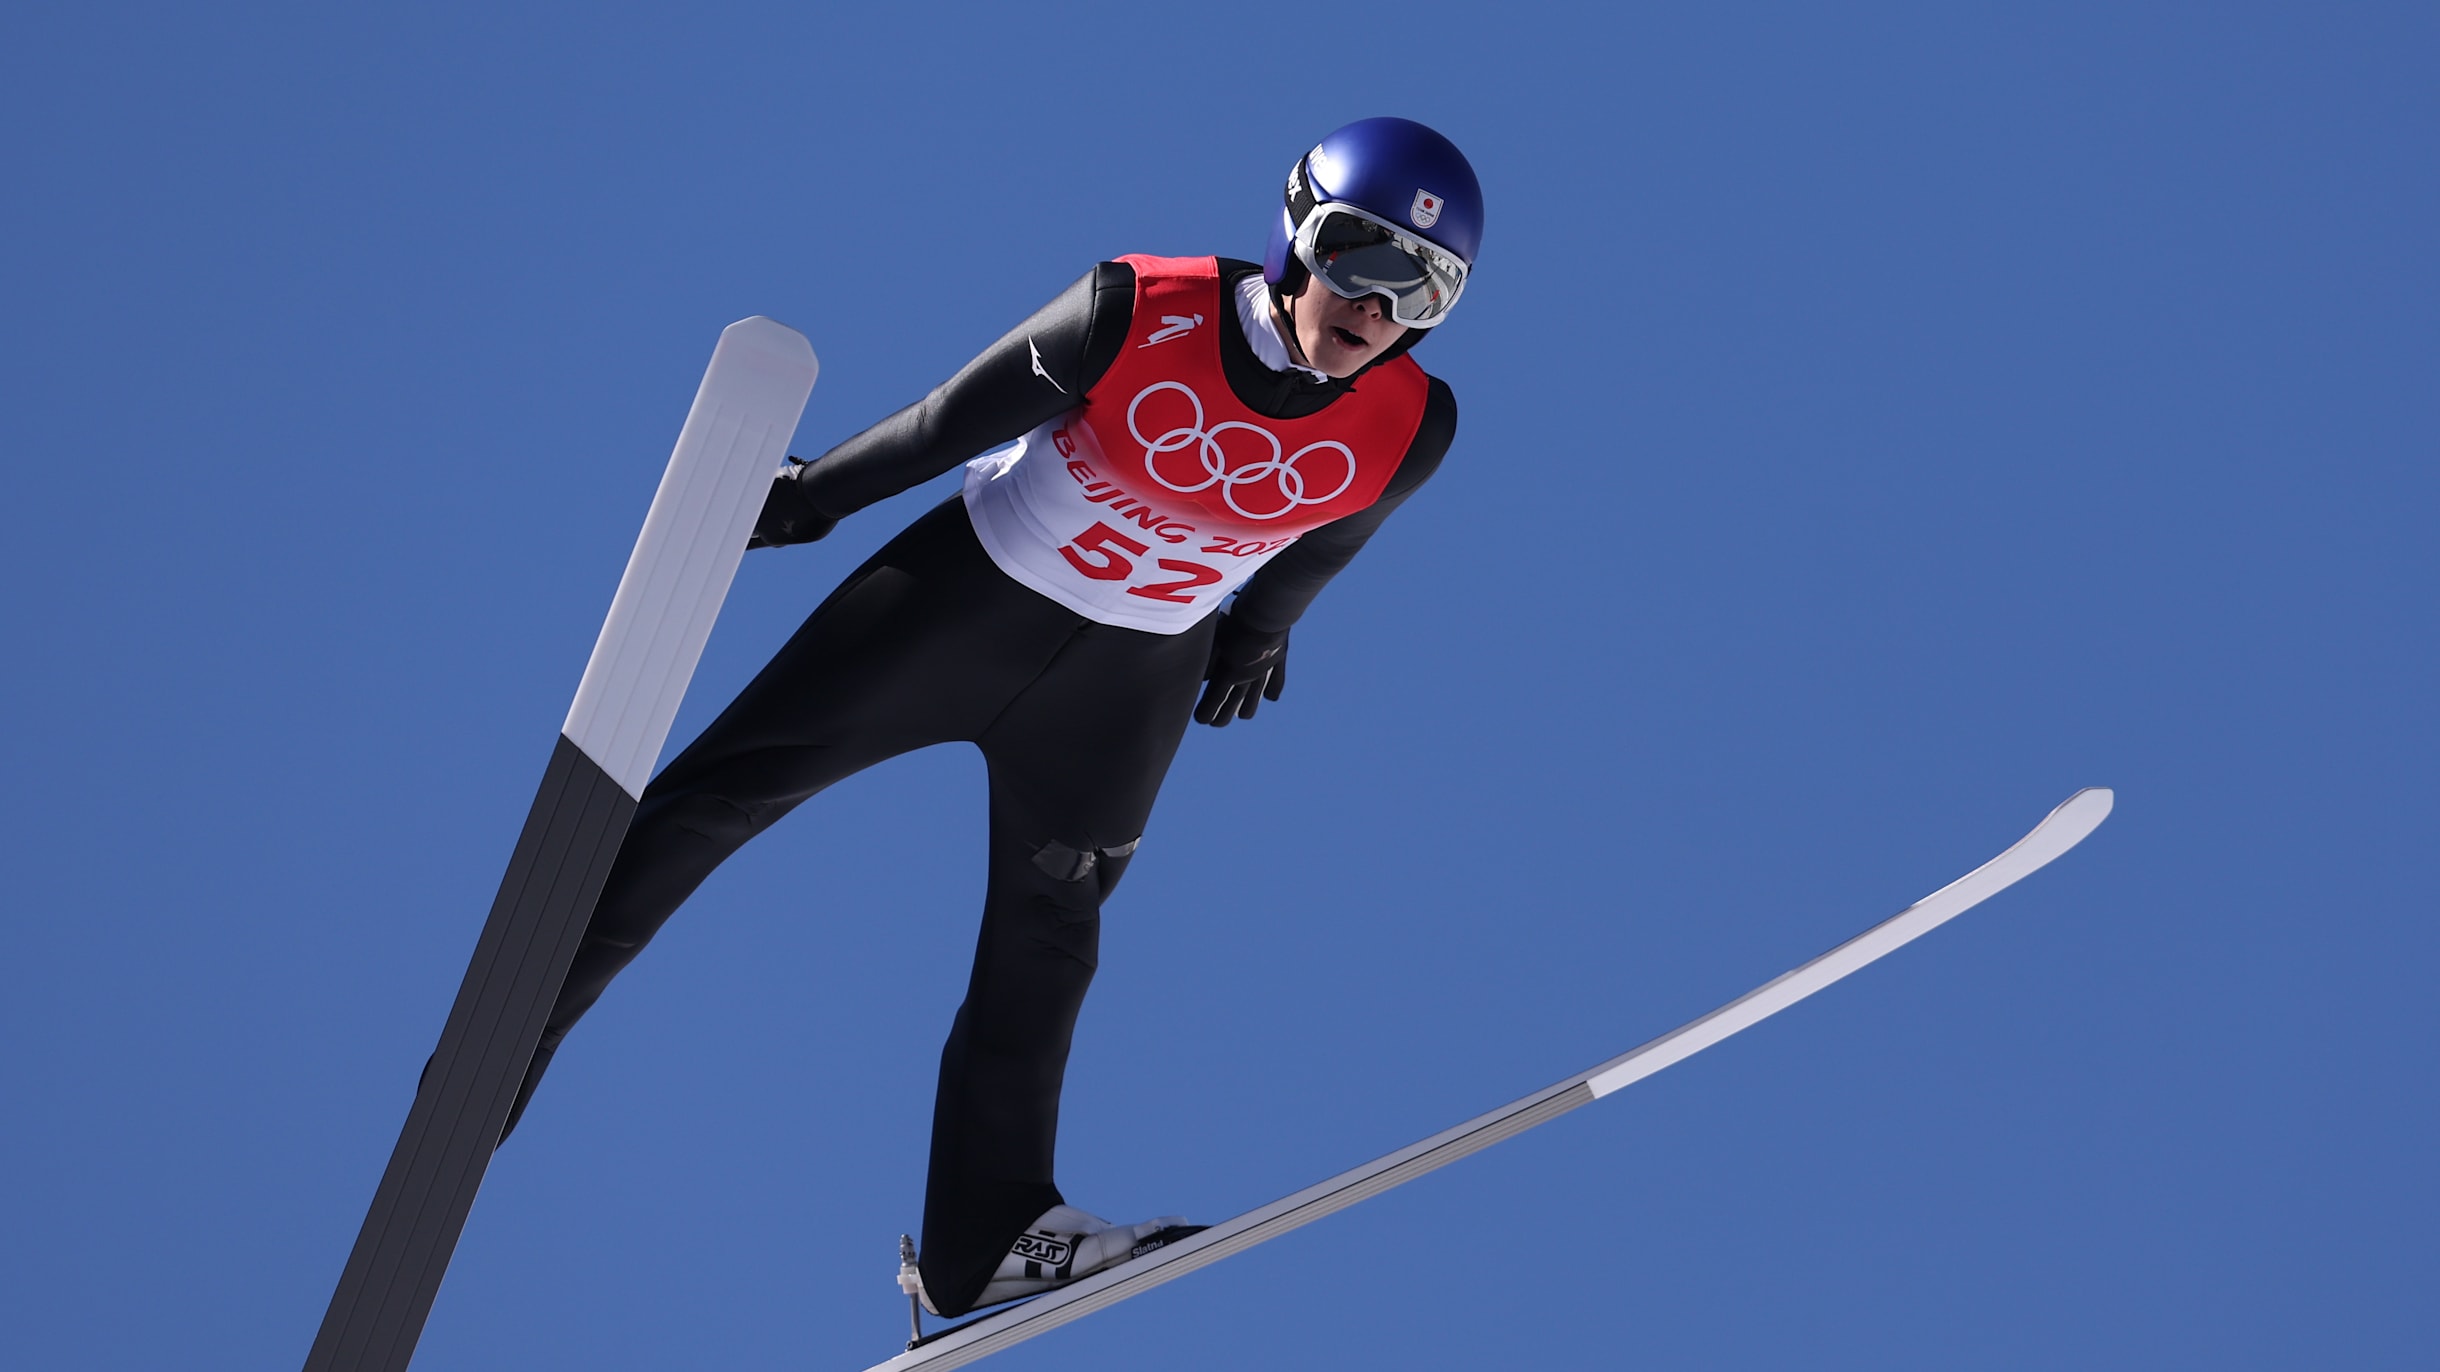 Ski Jumping at Beijing 2022 Full schedule of Olympic Winter Games competition and how to watch